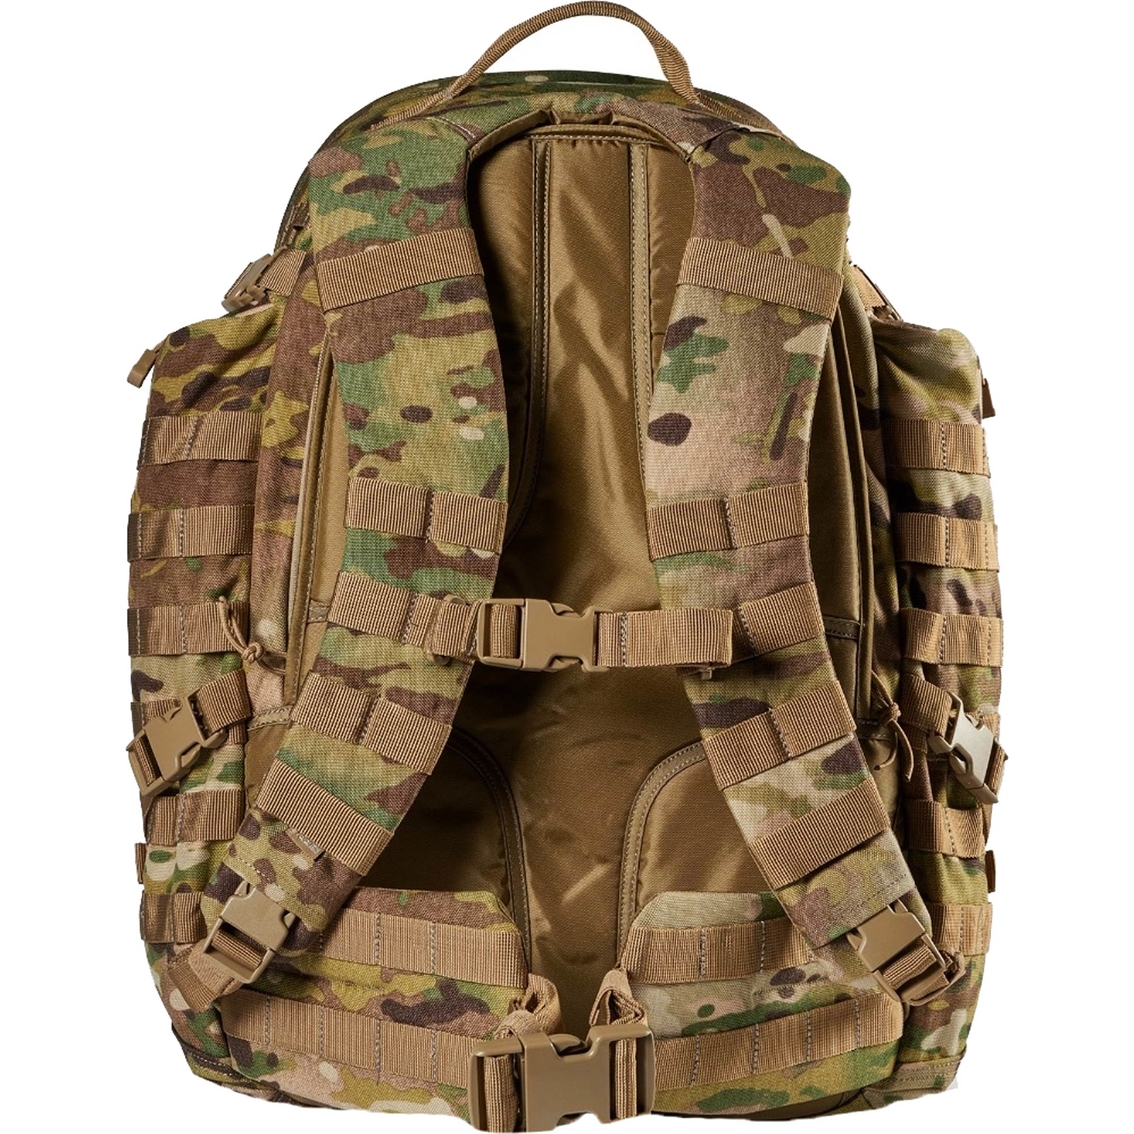 5.11 RUSH 72 2.0 Backpack - Image 4 of 10